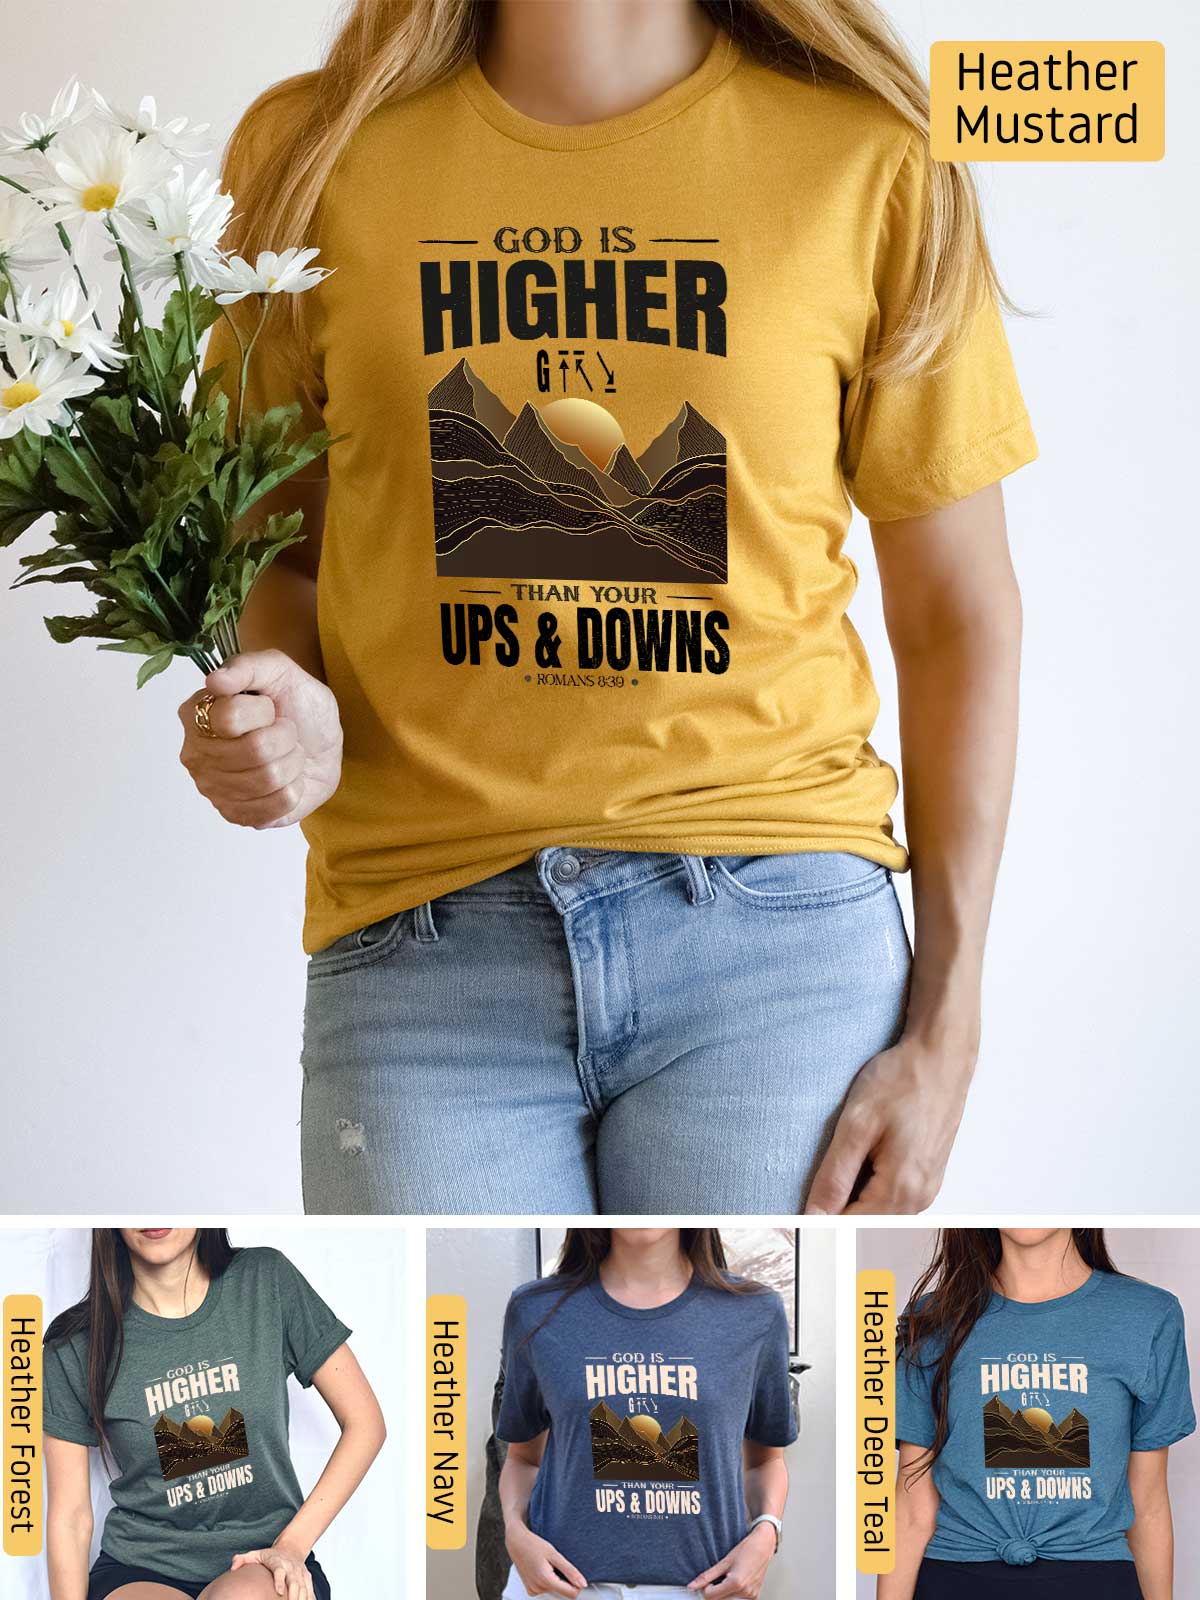 a woman wearing a t - shirt that says higher than ups and downs